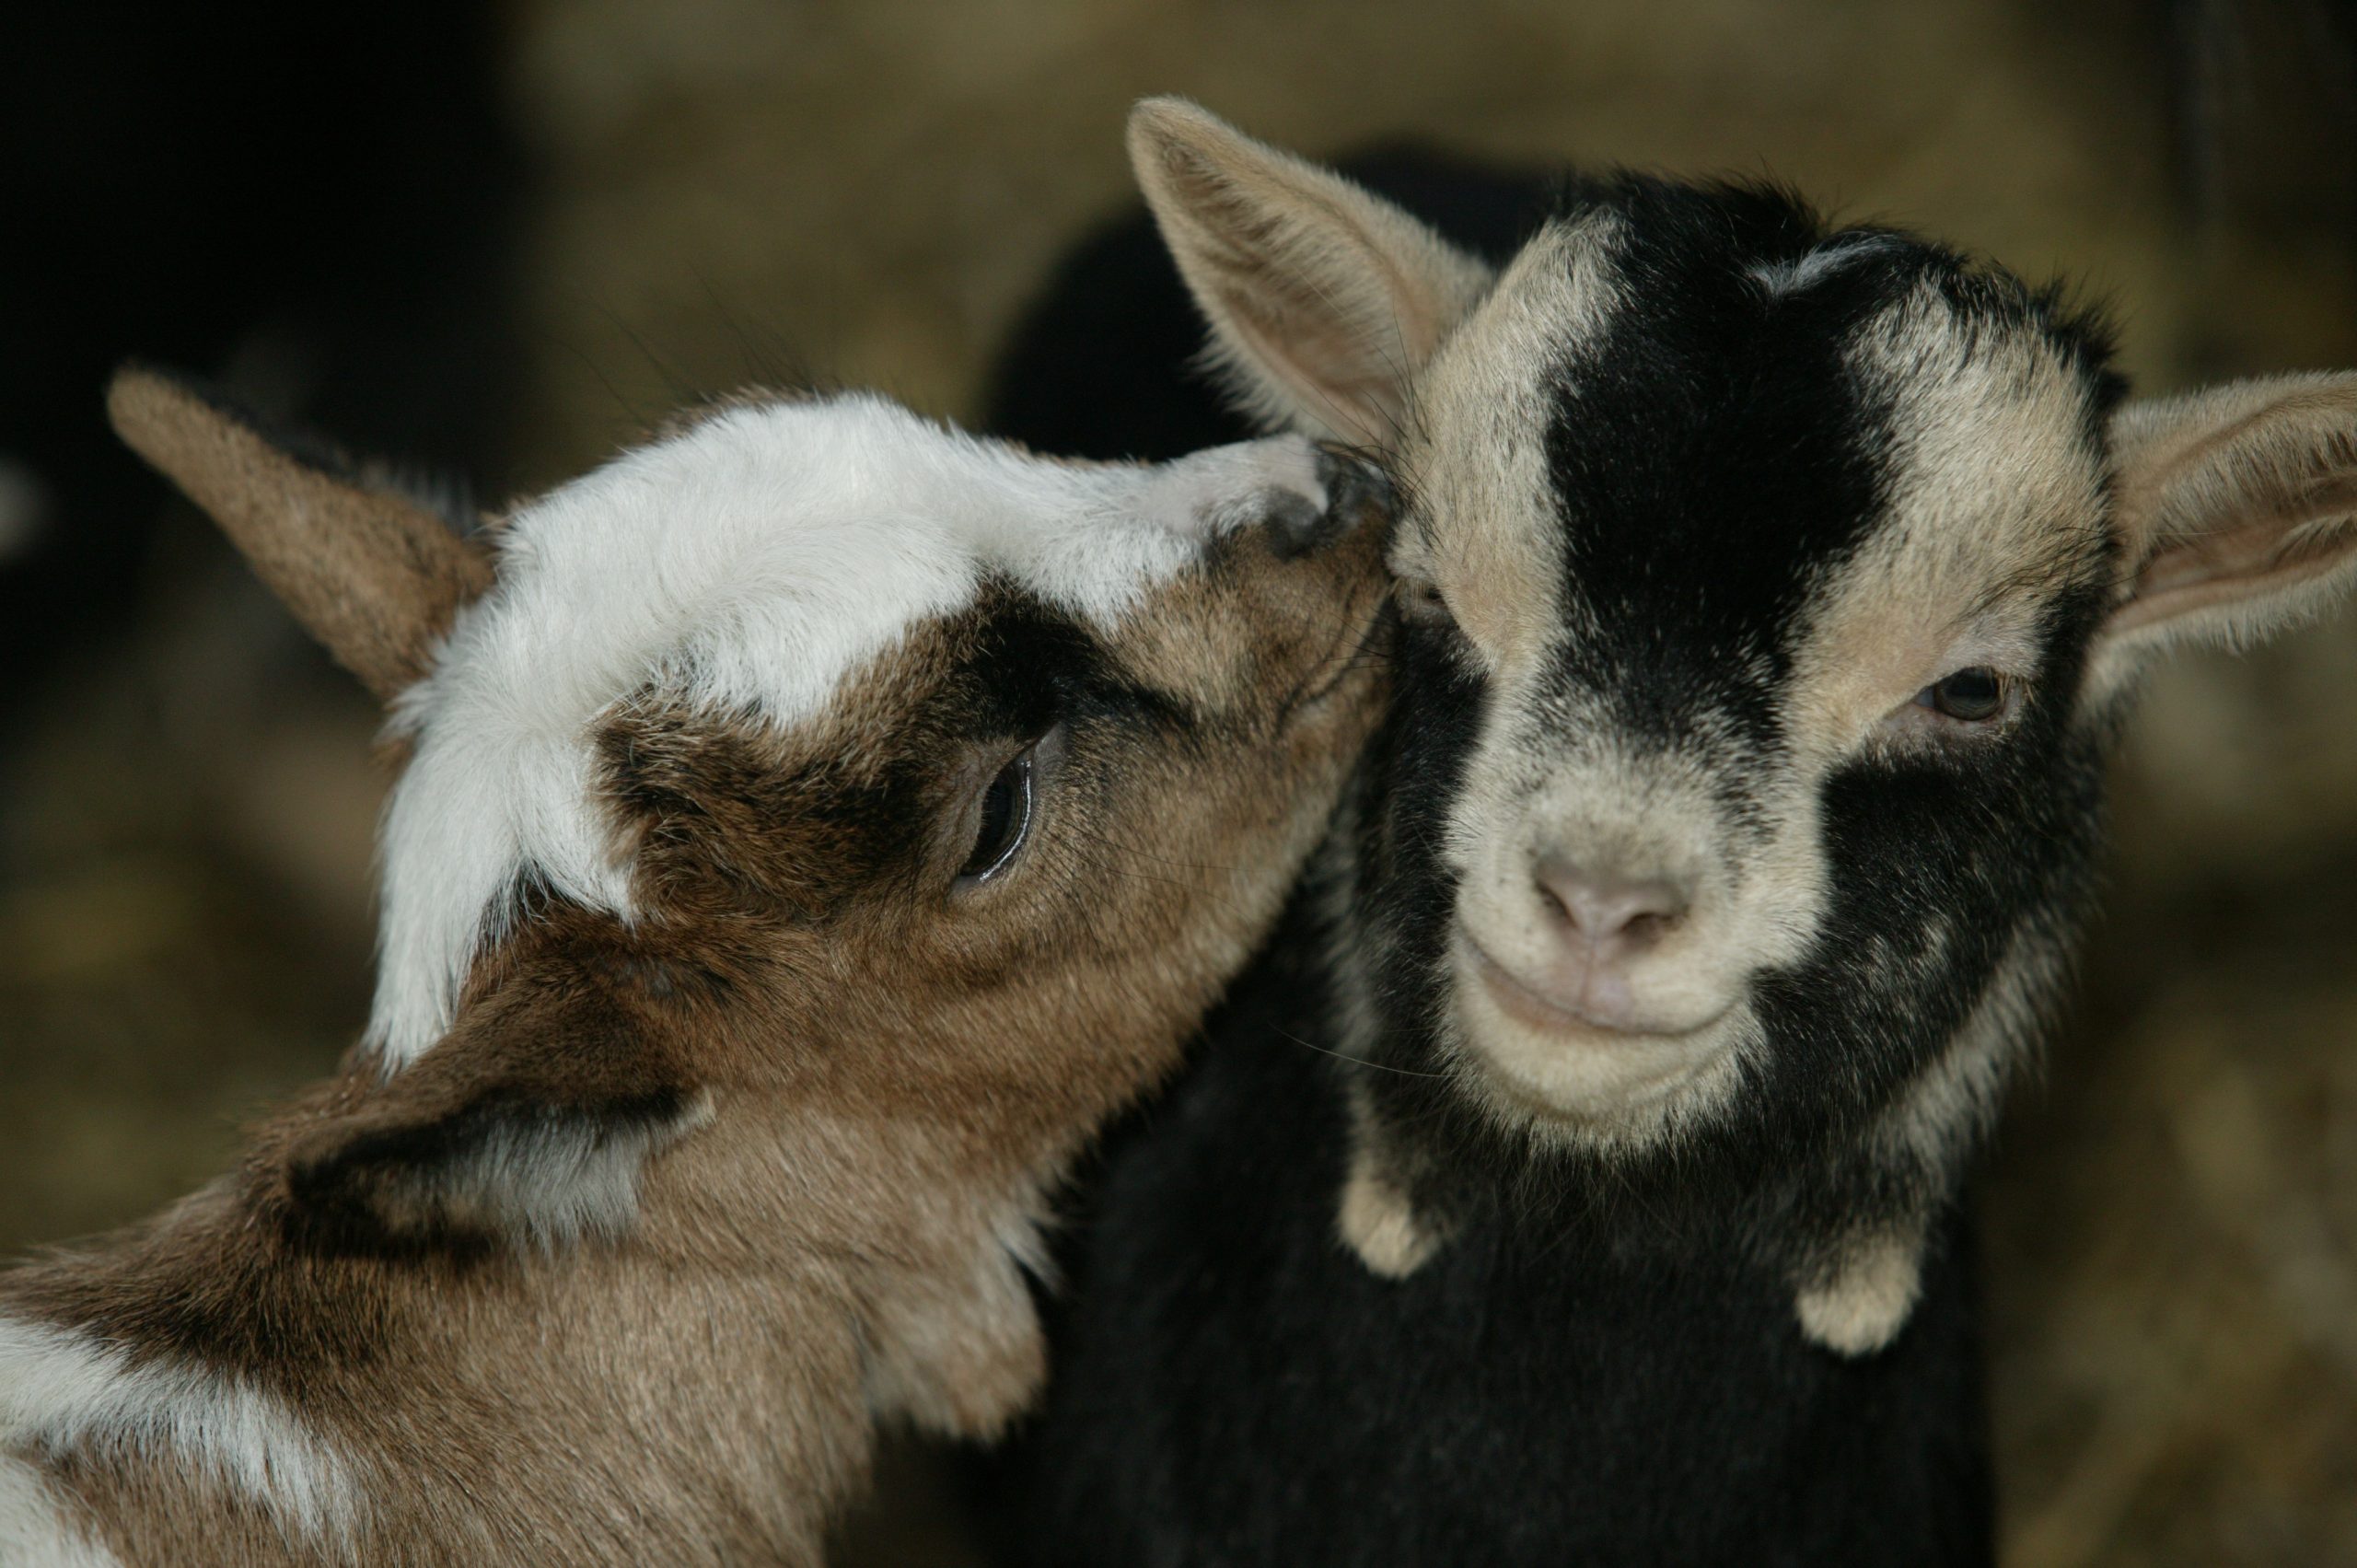 5 keys to colostrum success in baby goats